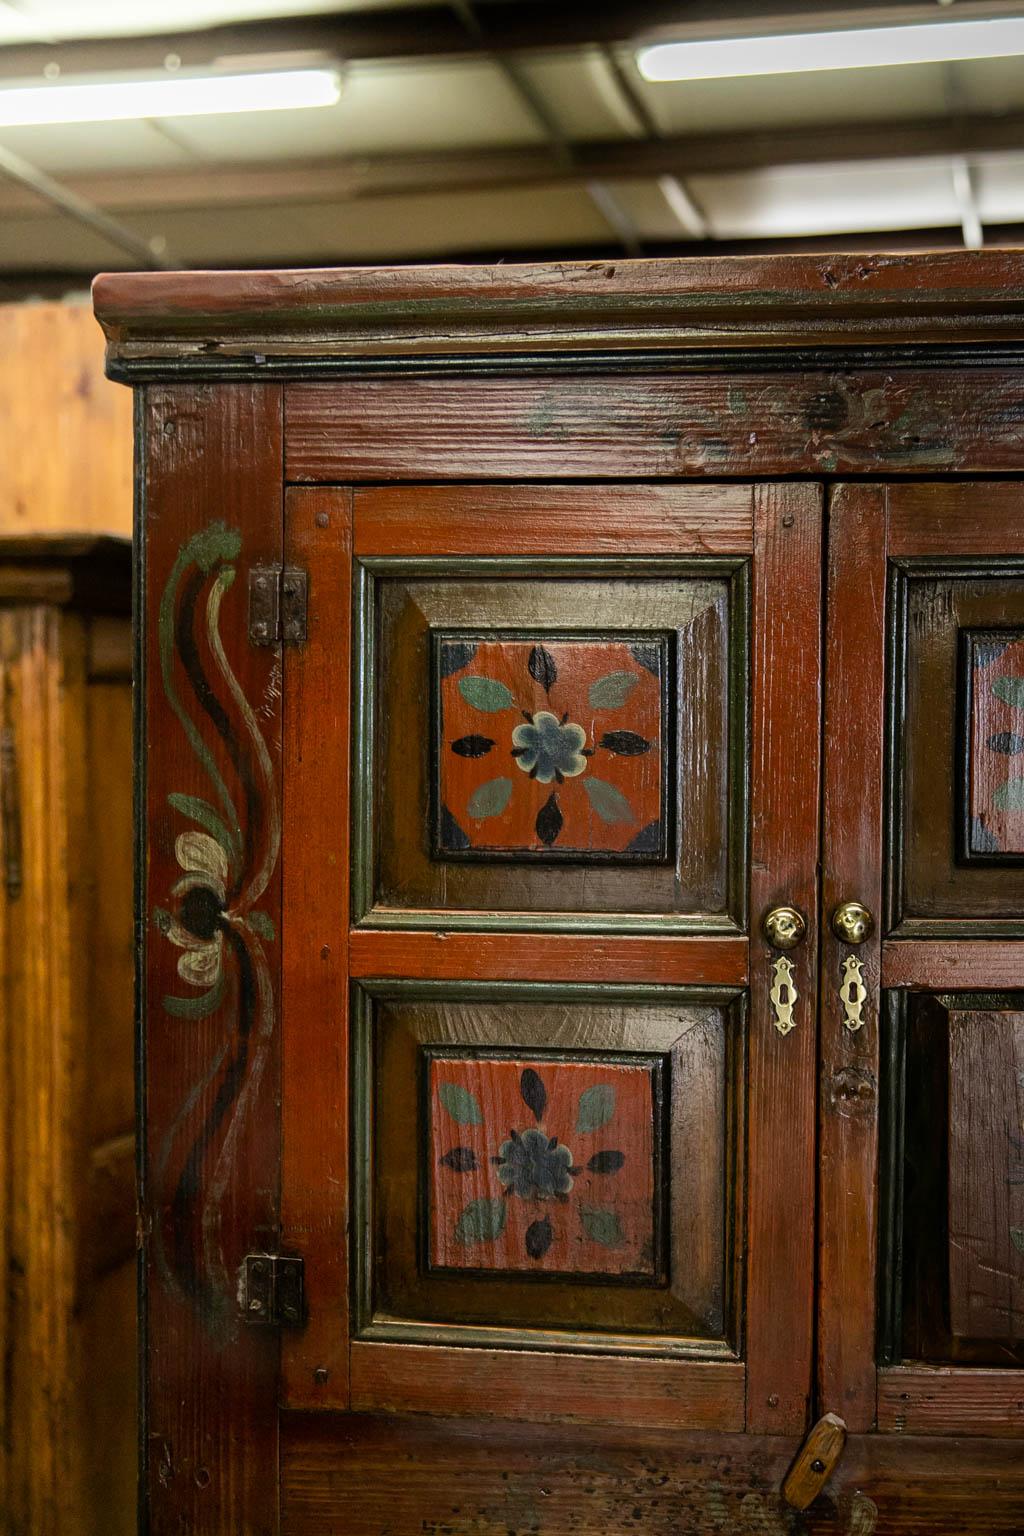 The inside top section of this cupboard has two fixed shelves. The lower section has a support structure for a shelf that could be made if desired. There is exposed peg construction throughout. The hinges are original and brass hardware is later.